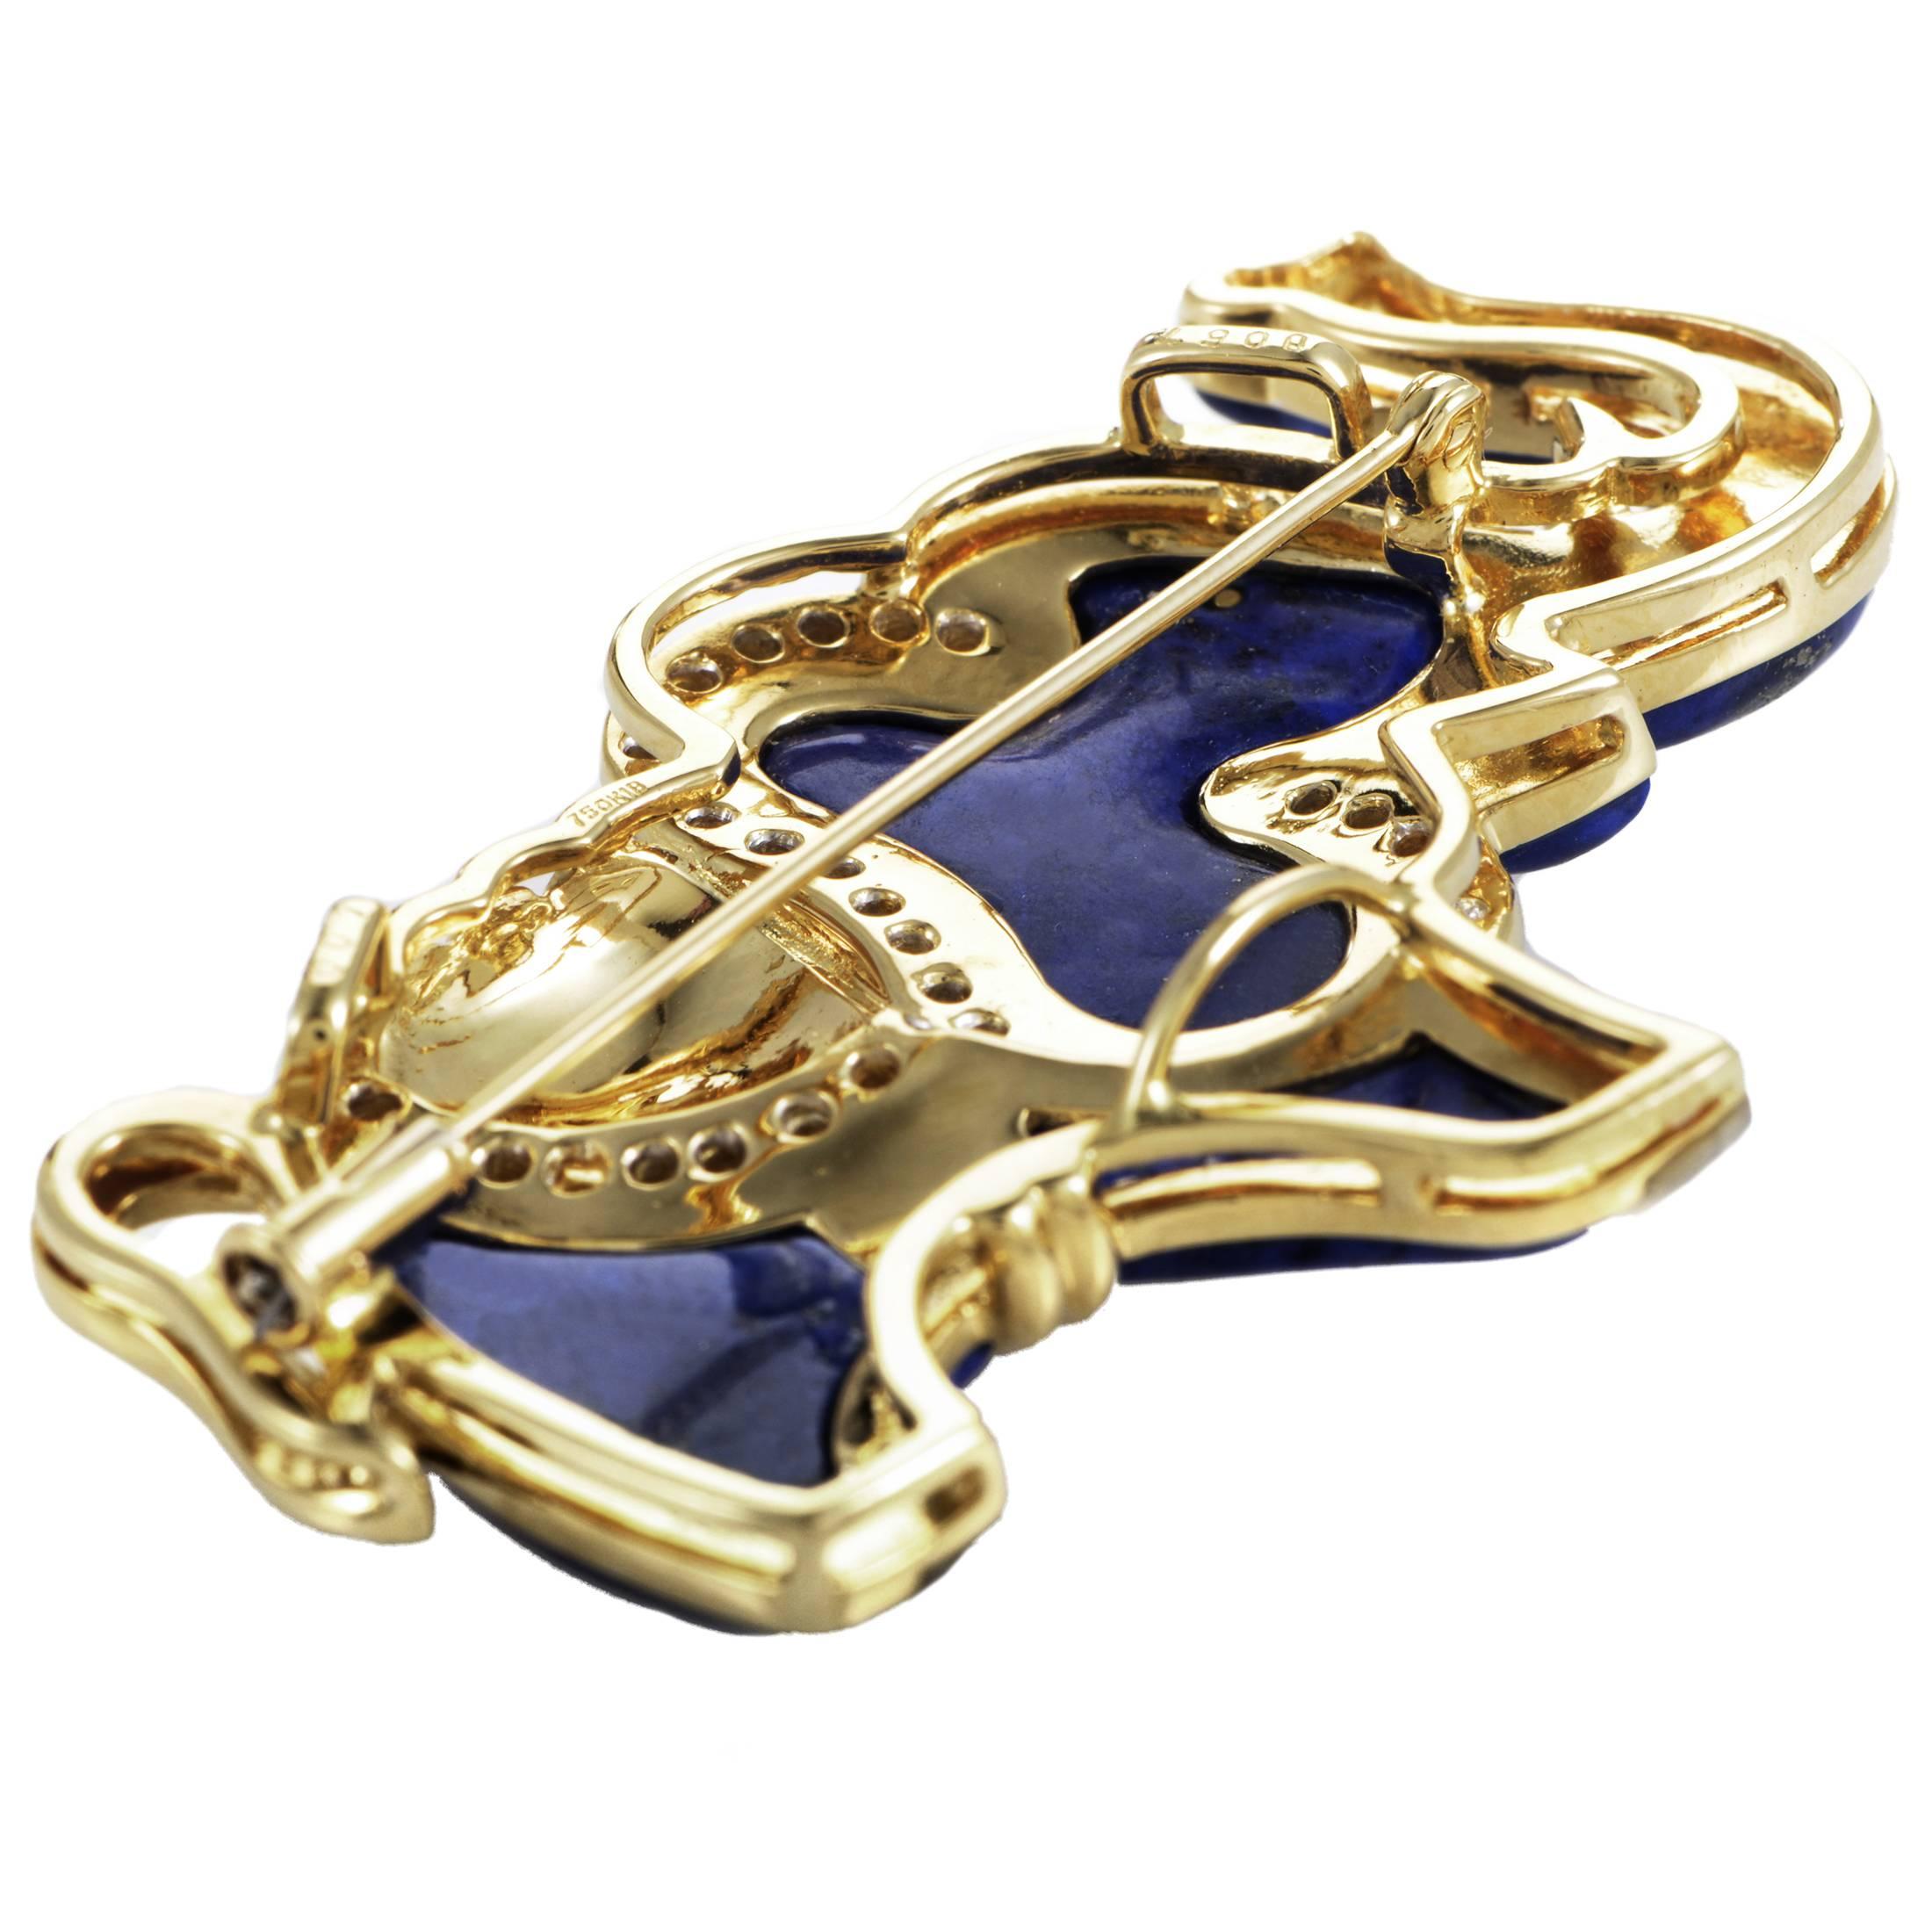 With splendid mother of pearl in place of marvelous ivory and a striking ruby as a piercing eye, this enchanting brooch in the shape of an elephant is made of 18K yellow gold and wonderful lapis lazuli, while sparkling diamonds totaling 0.45ct add a